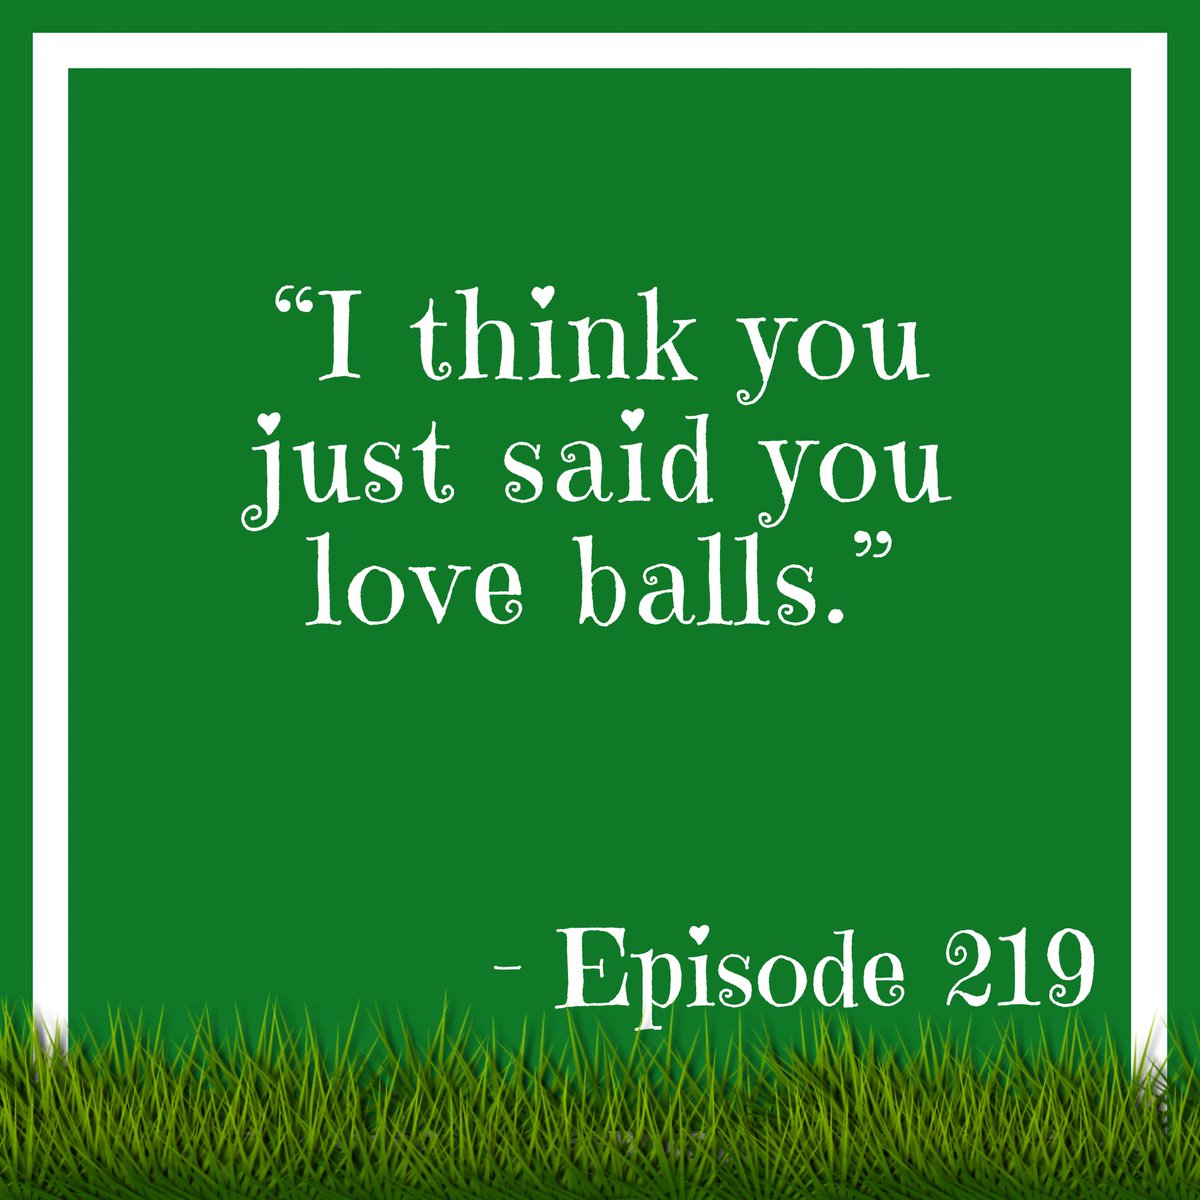 That’s What She Said
#thegreenergrasspodcast #greenergrasspodcast #podcast #offthetonguepodcastnetwork #wouldyourather  #prosandcons #pro #con #youhavetopickone #youtube #spotify #patreon #fools #rules #prankster #rulefollower #thatswhatshesaod #balls #twss #love